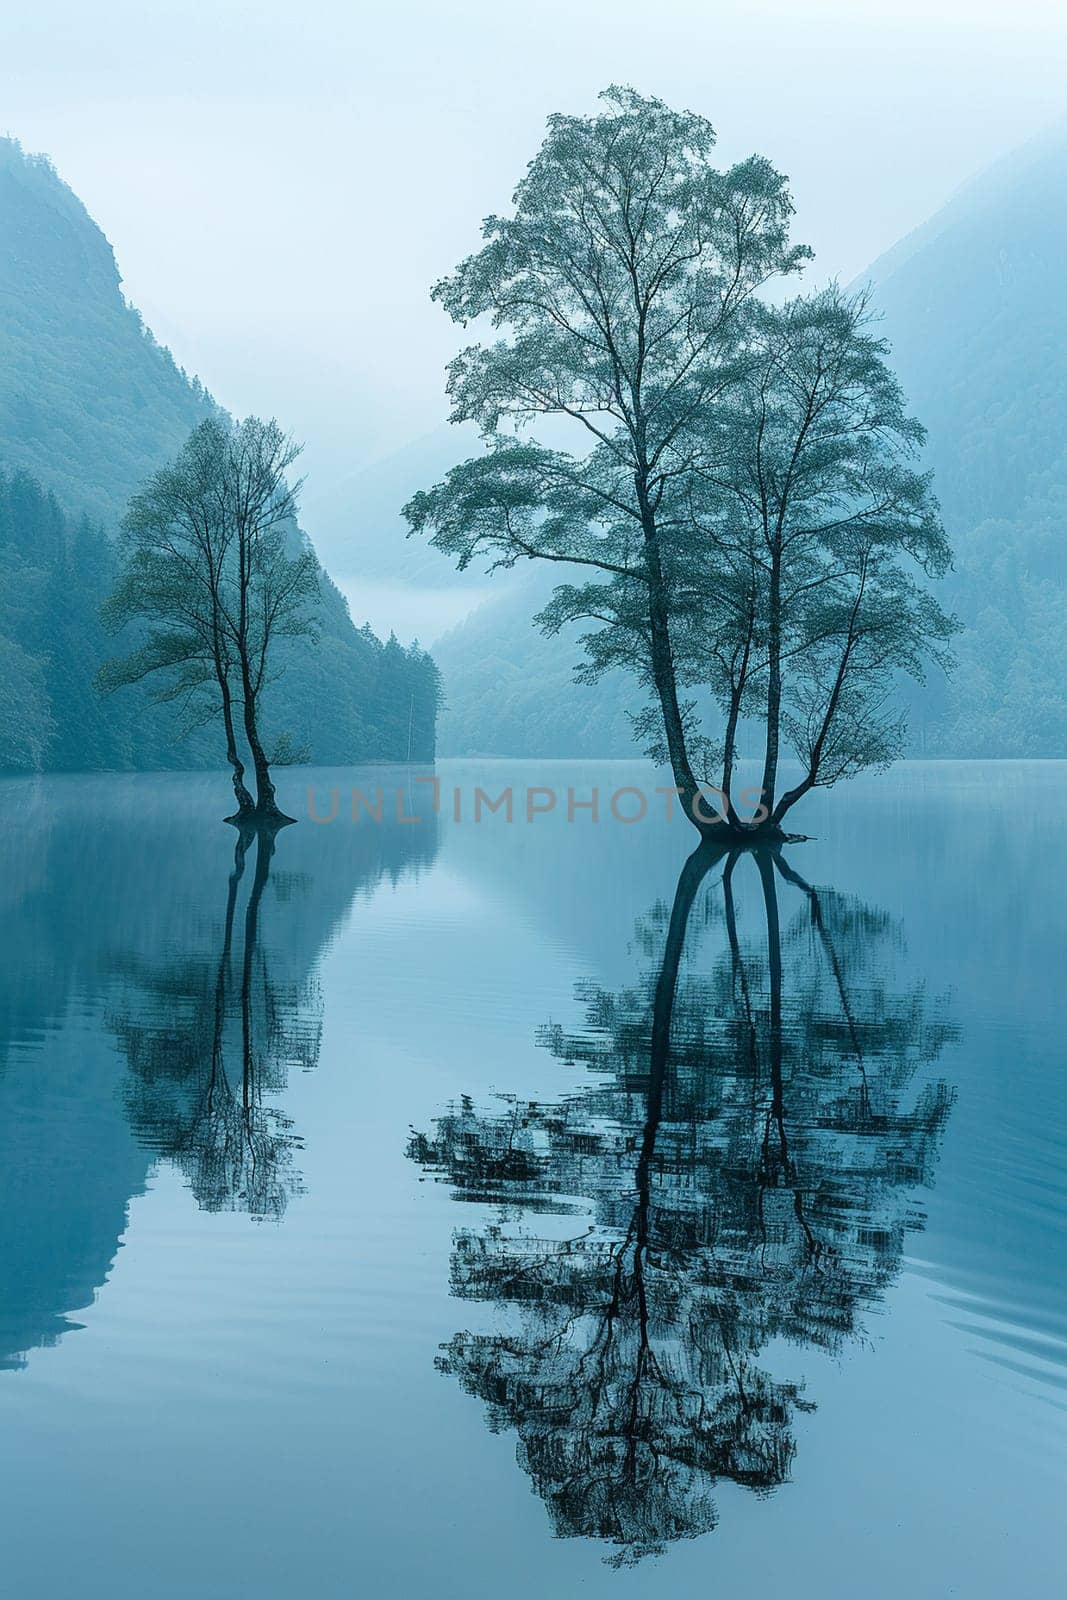 Desktop wallpapers featuring a serene lake at dawn, perfect for calm and reflection.